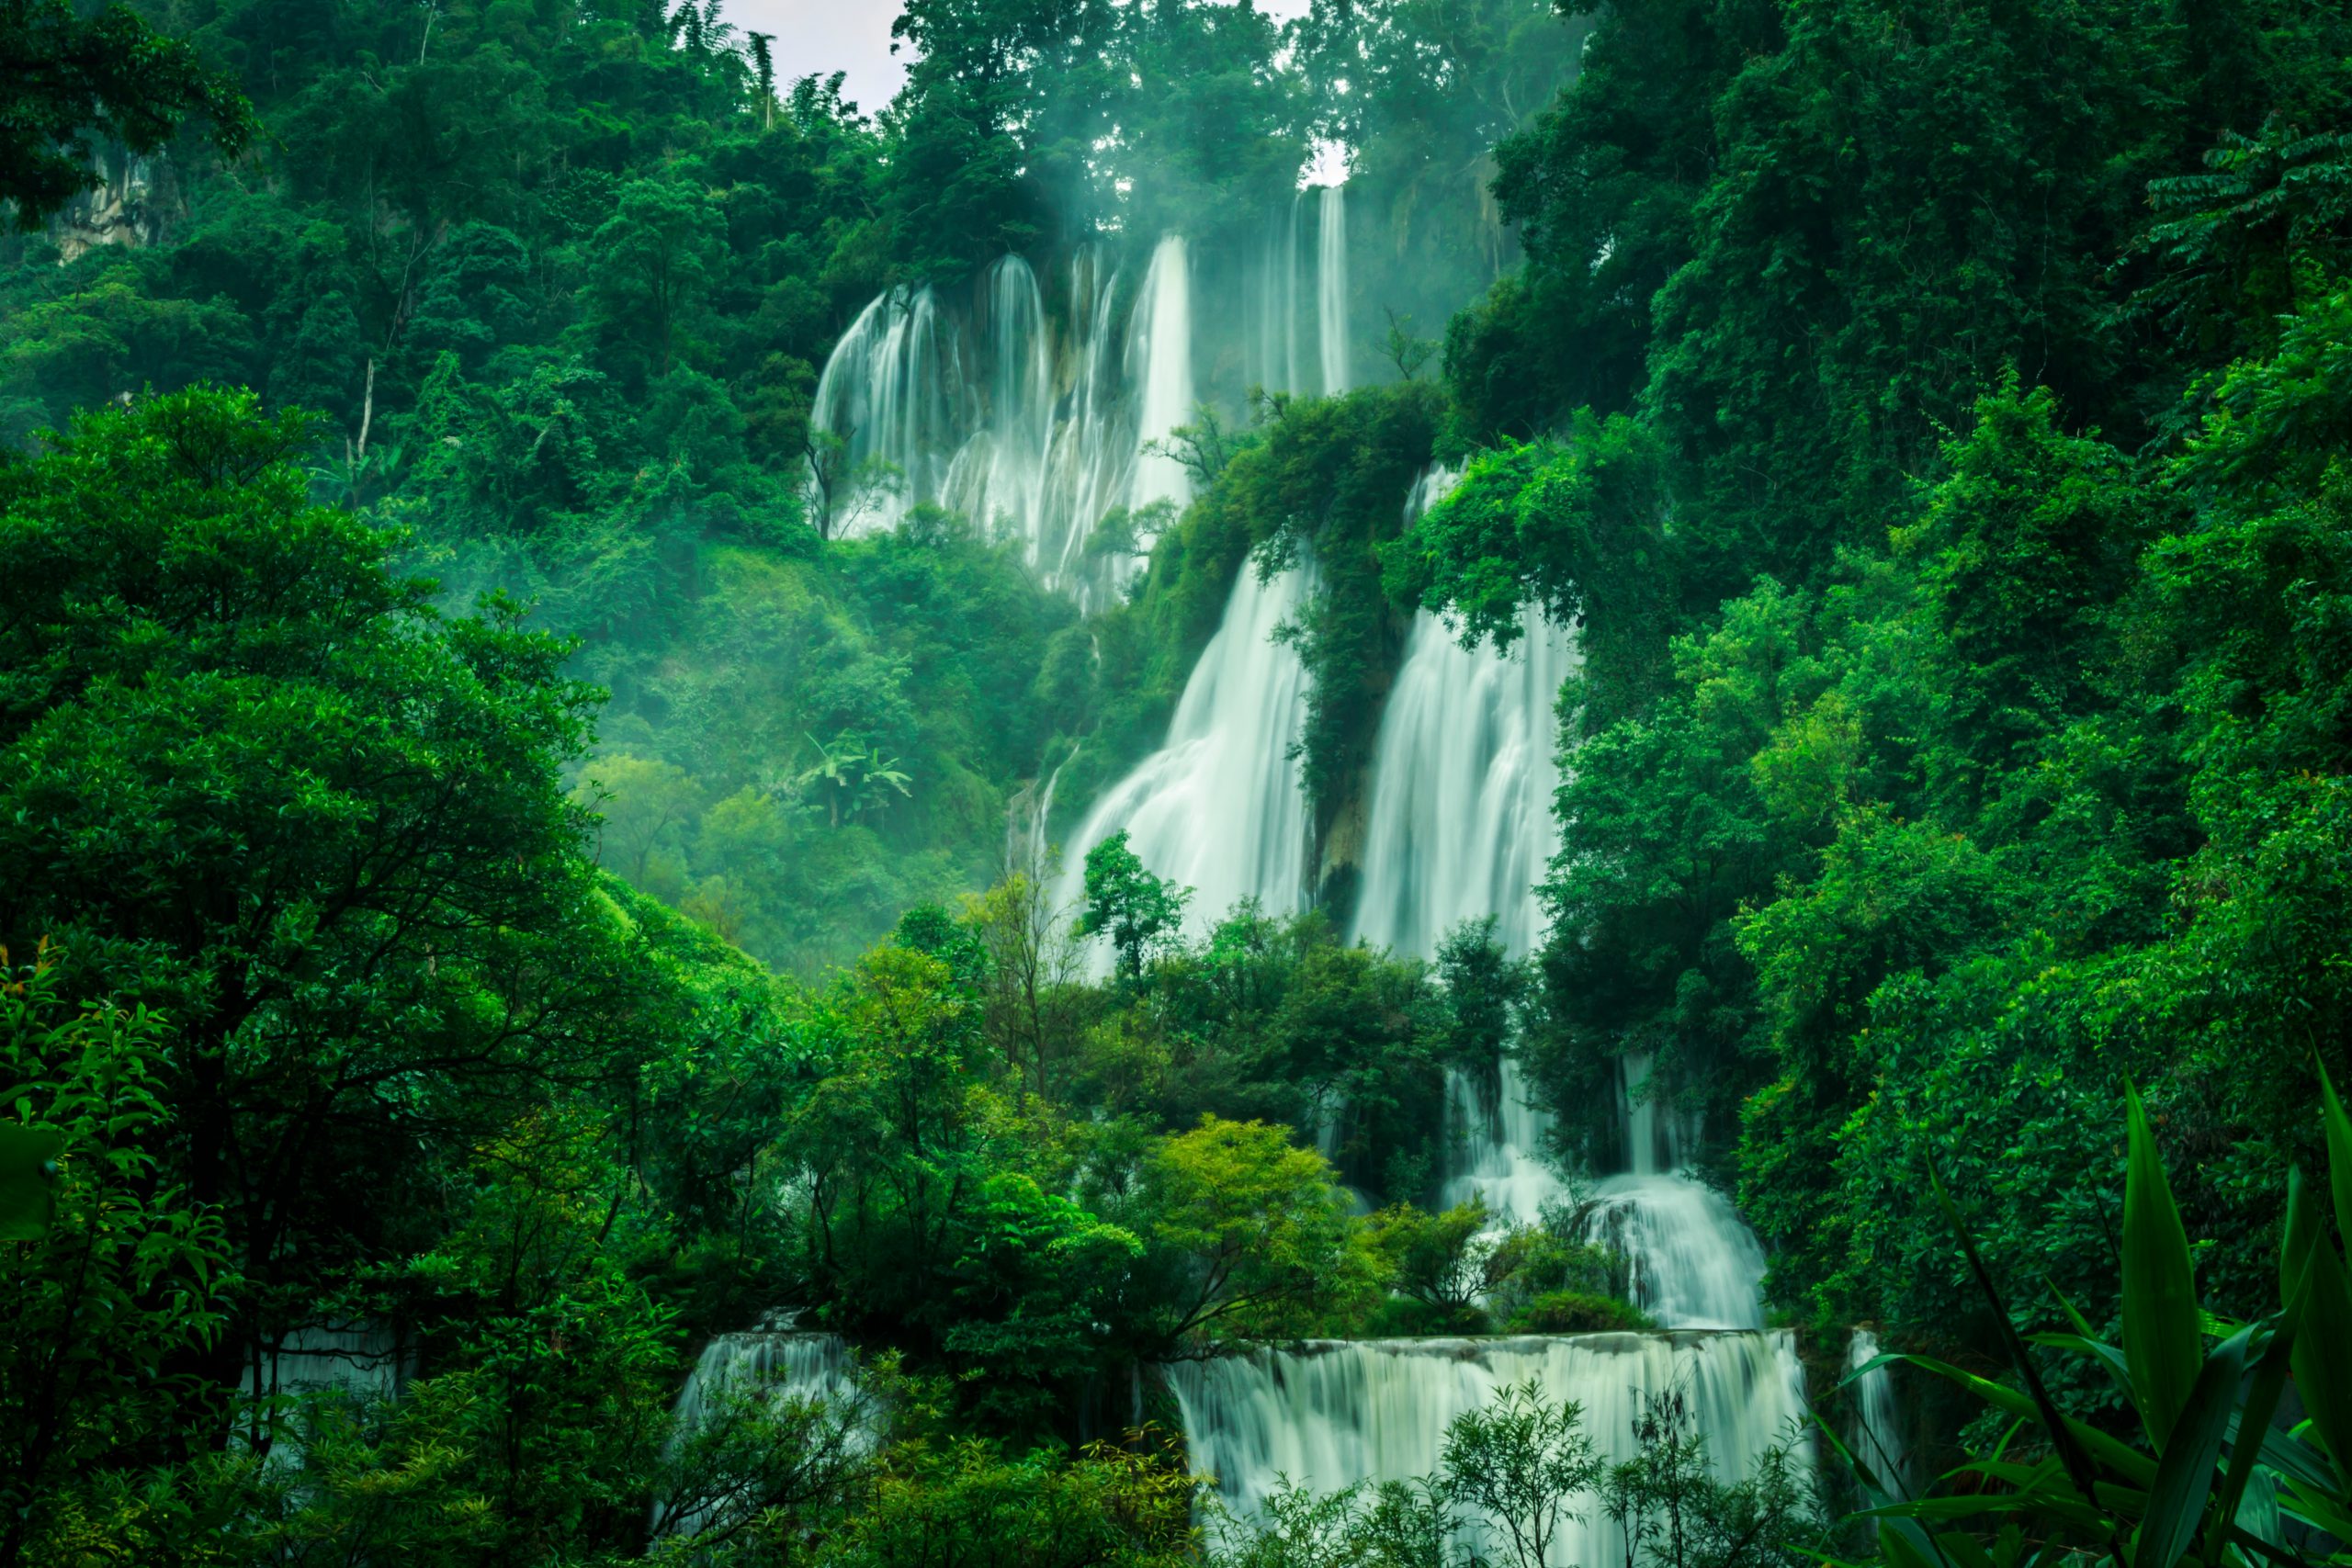 waterfall in the forest of thailand named tee lor su waterfall